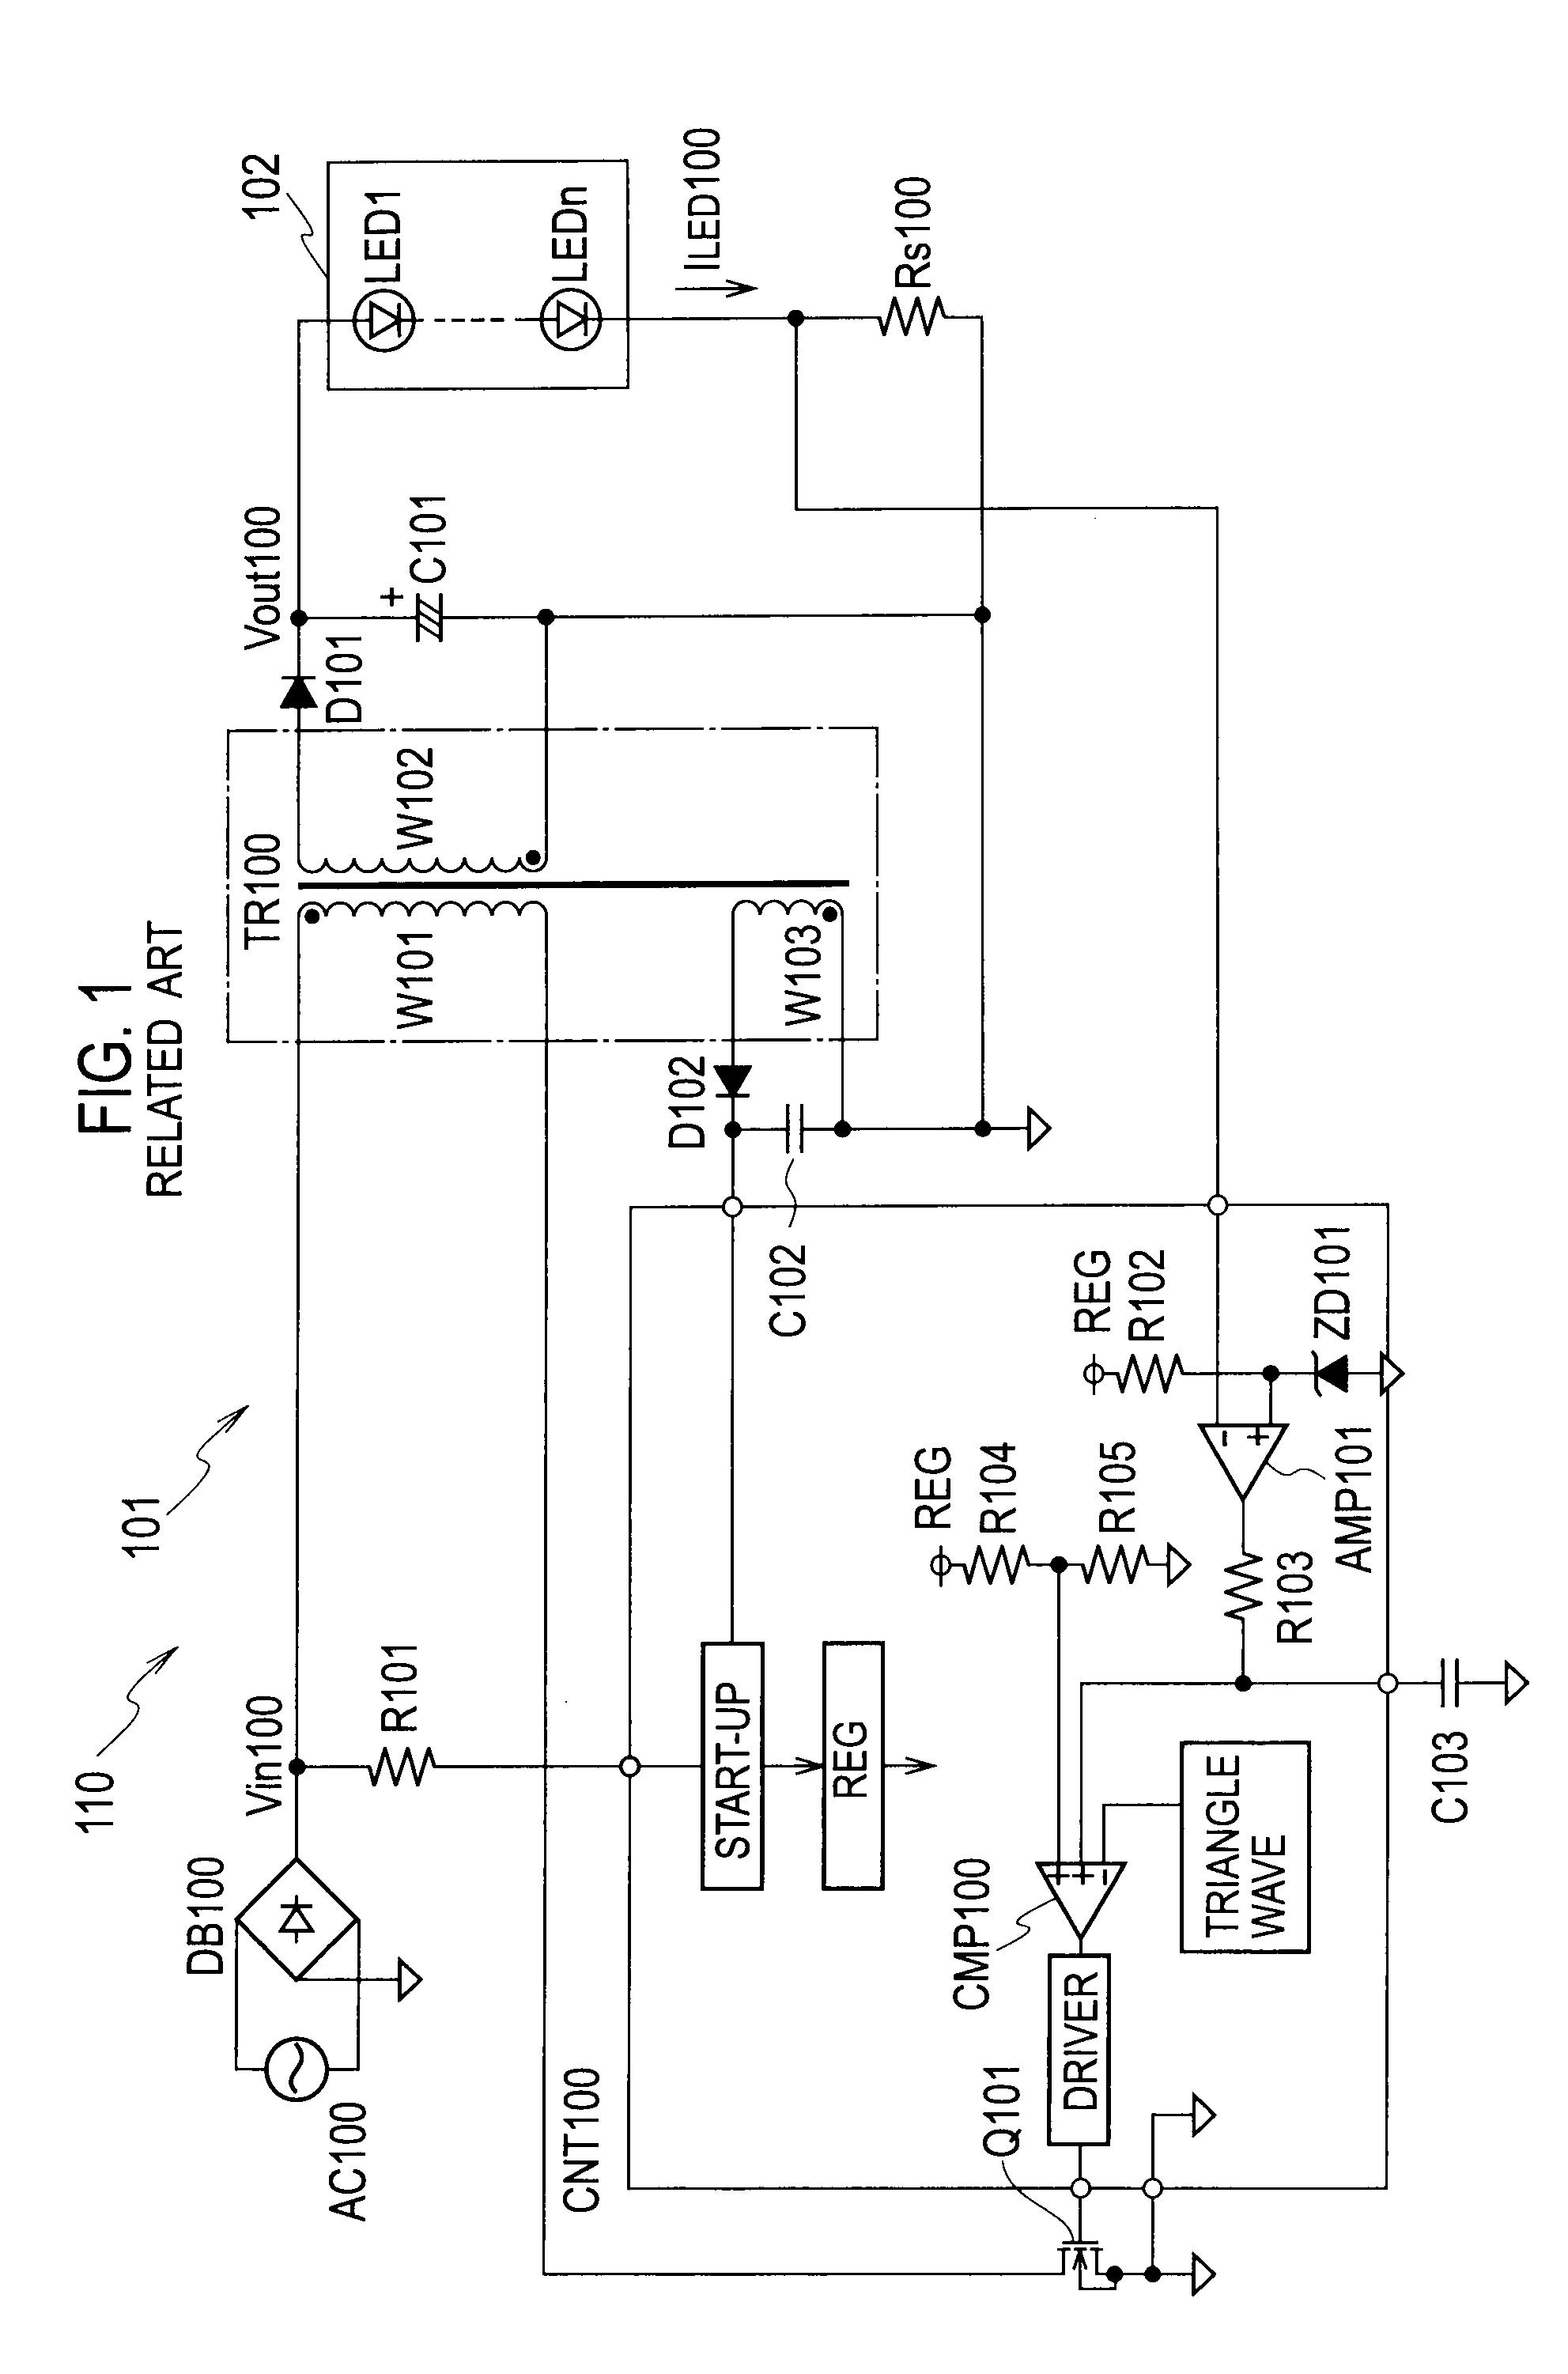 LED driving apparatus and LED lighting apparatus